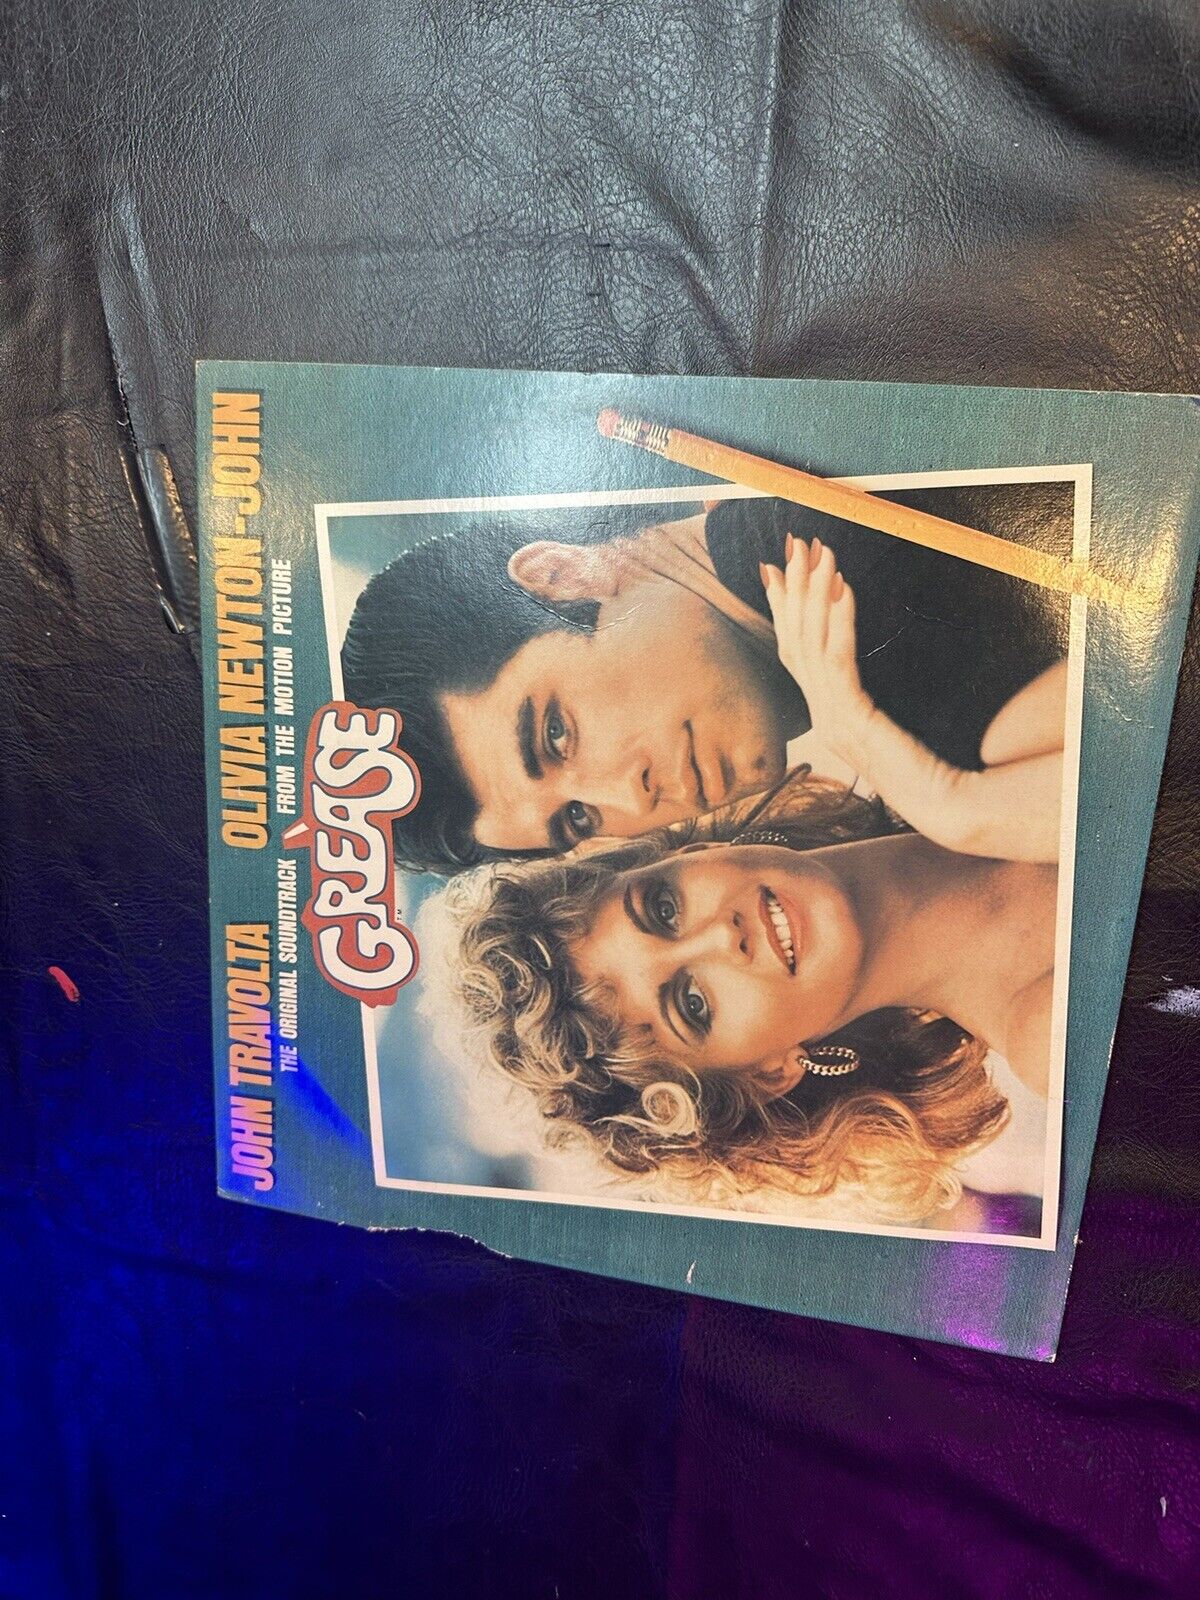 Grease (Original Motion Picture Soundtrack) by Grease / O.S.T. (Record, 2015)